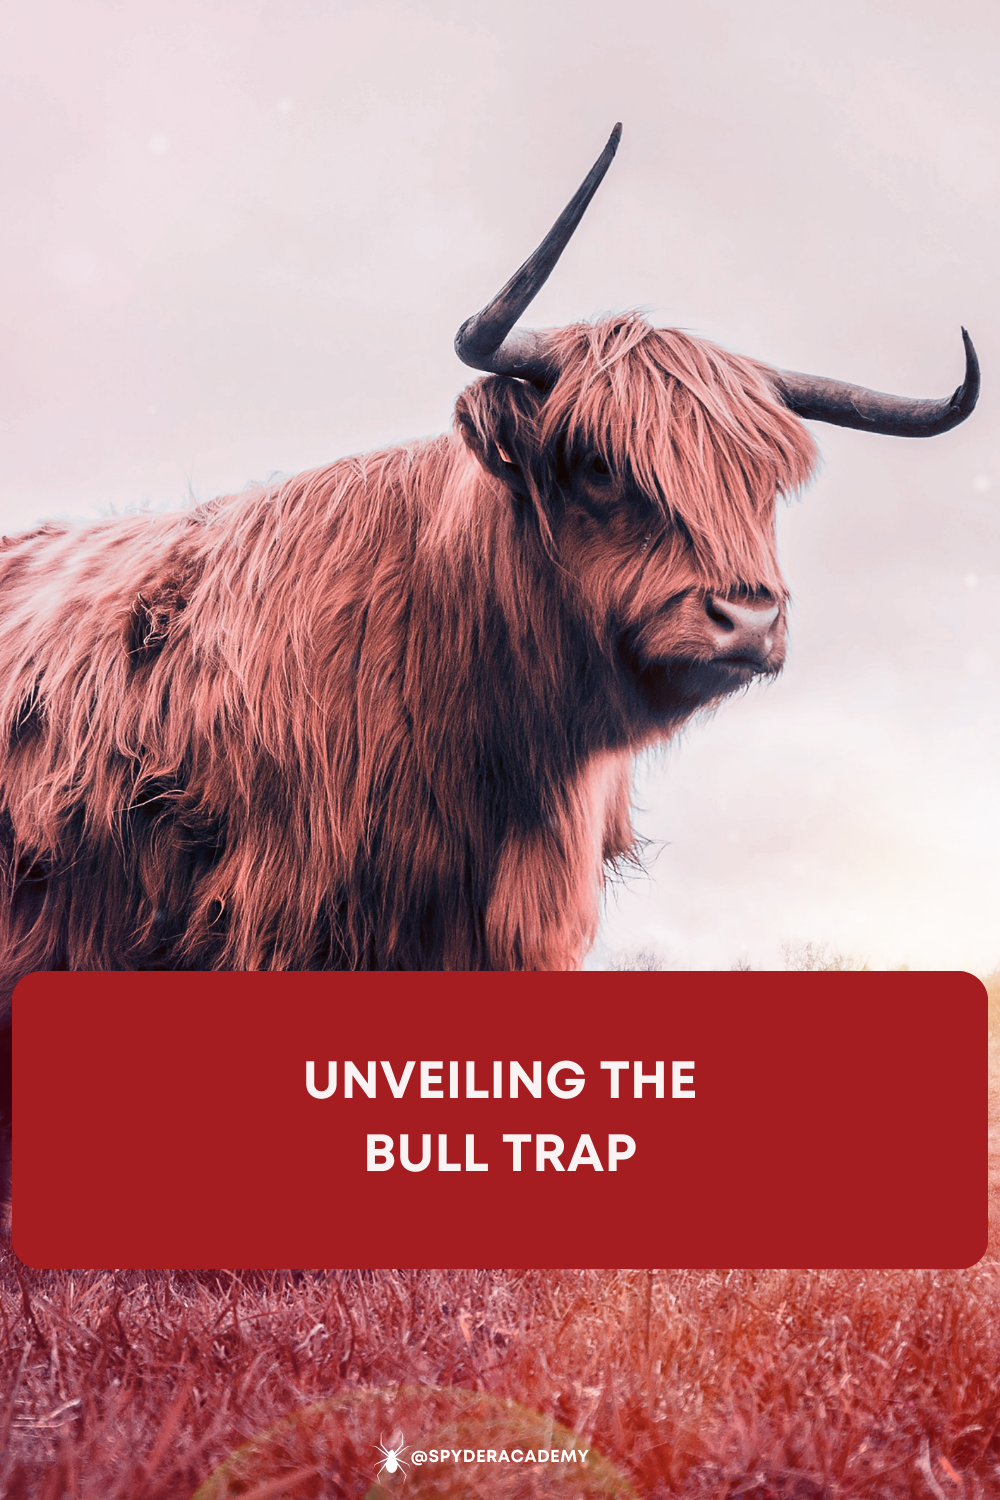 A bull trap occurs when a rising trend in the market prompts investors to believe that an asset's value is on a sustainable upward trajectory.